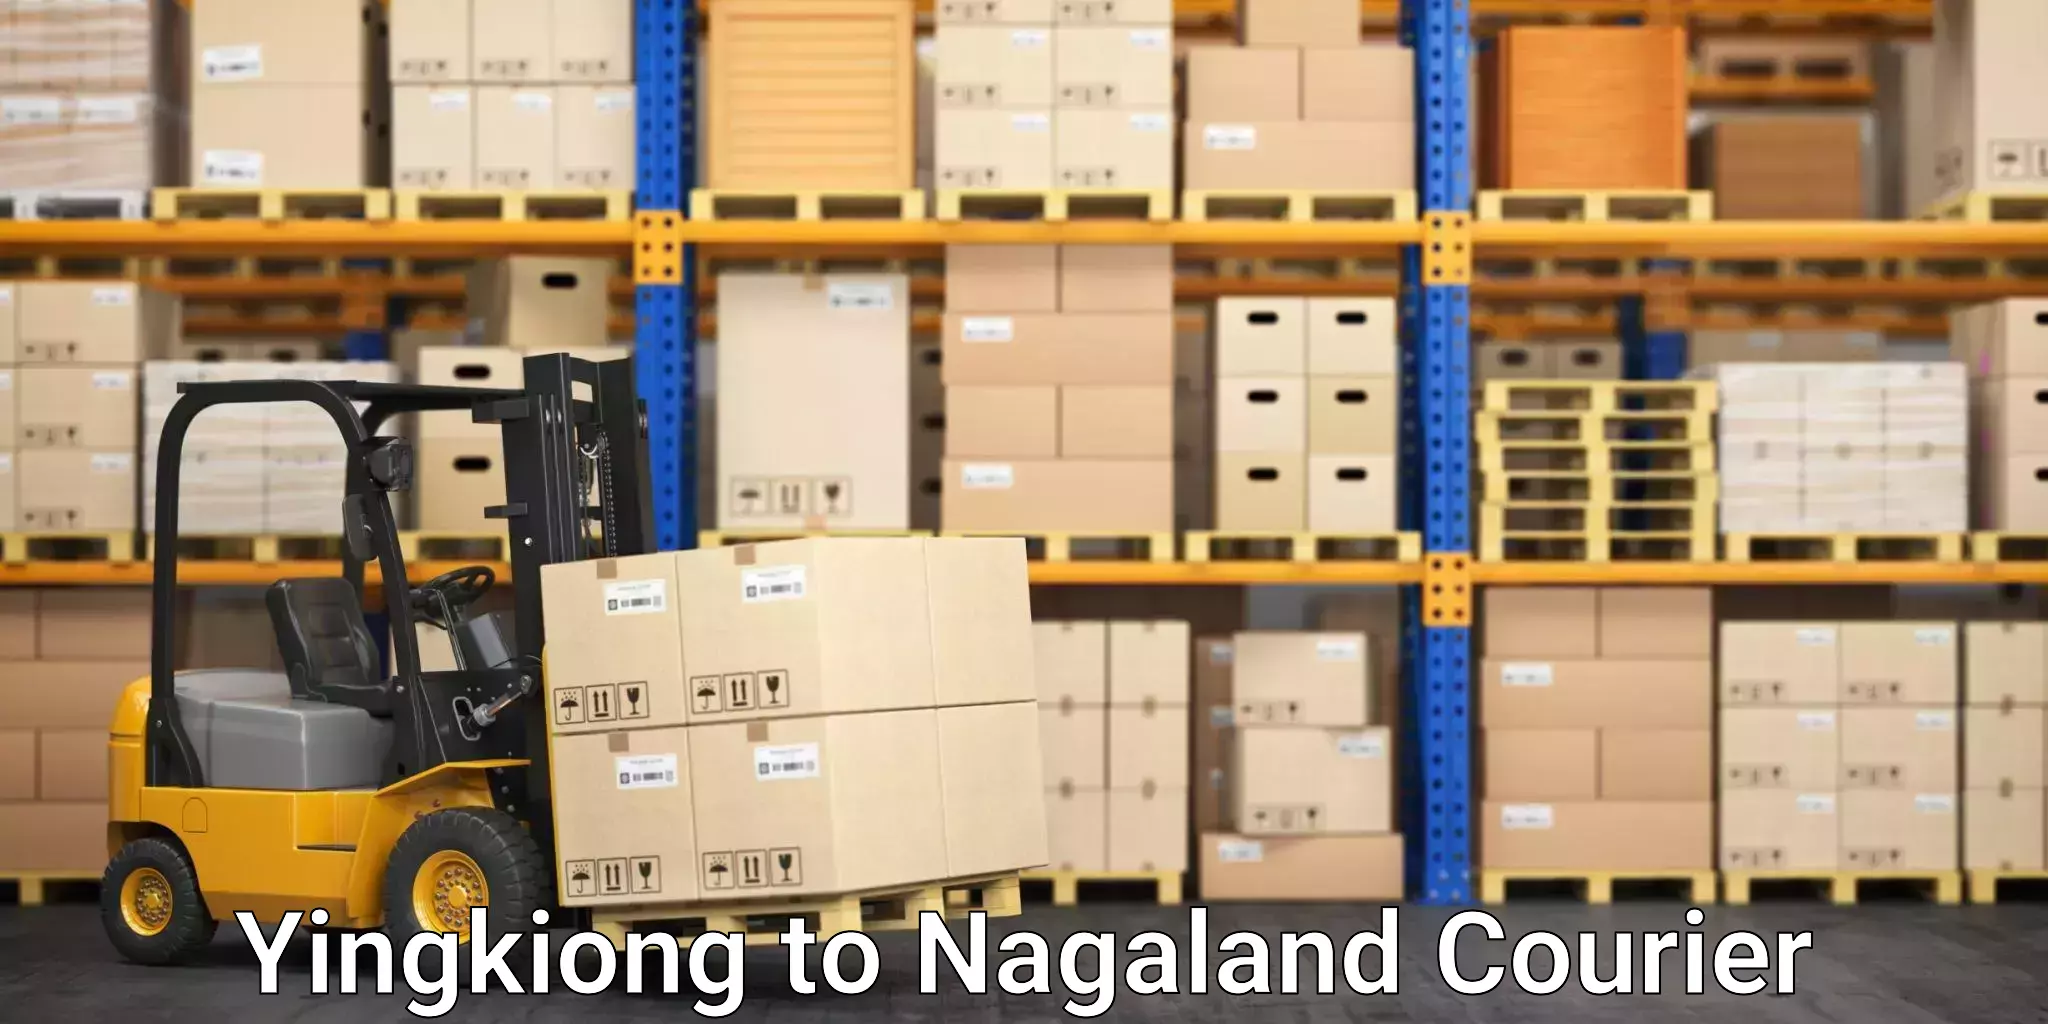 Affordable parcel service Yingkiong to Nagaland